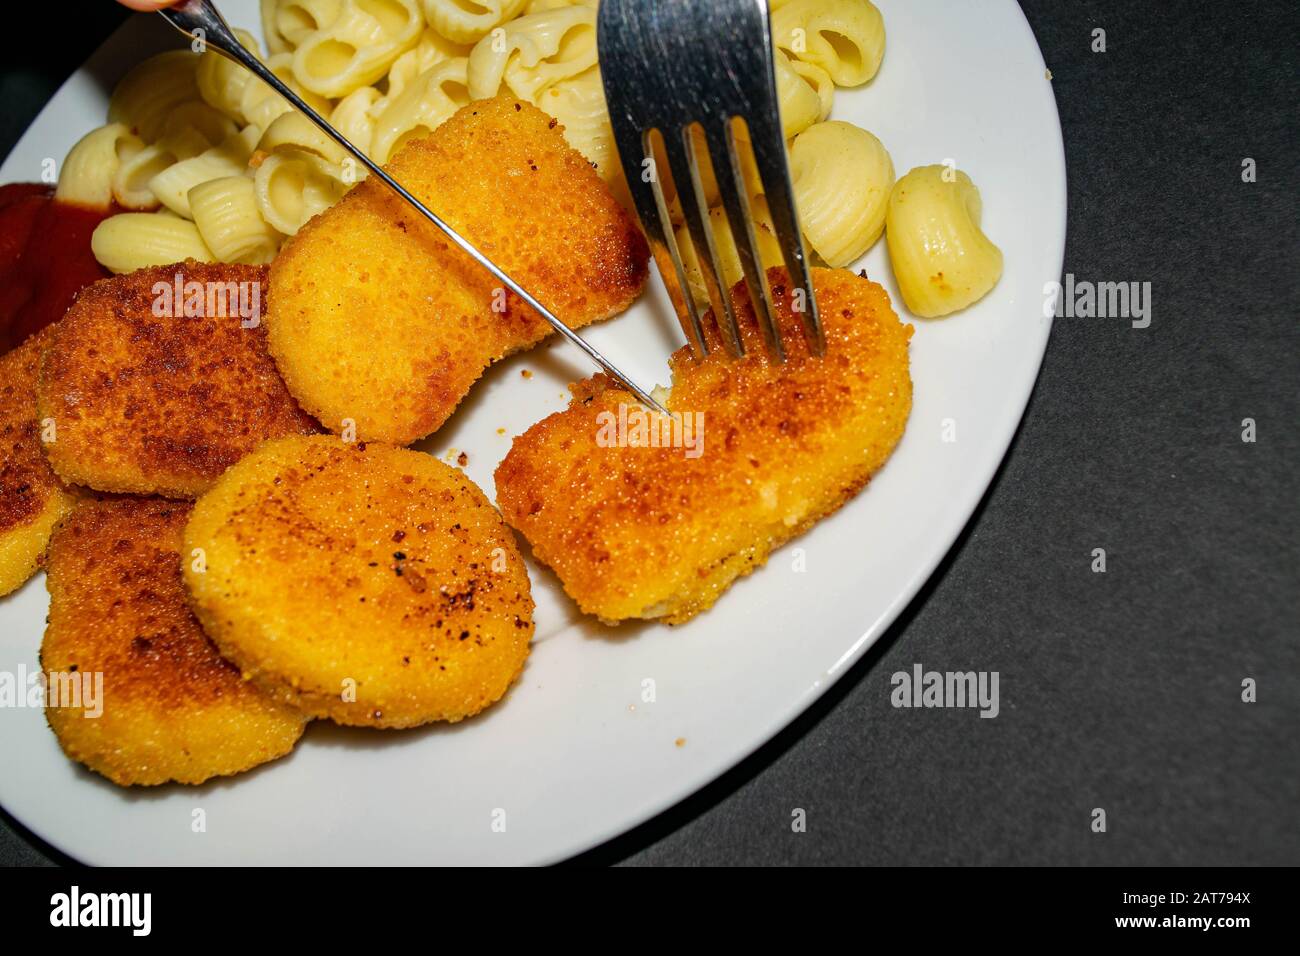 Fried chicken nuggets and boiled pasta with ketchup on a white plate on a dark background. Fork and knife cutting up the nuggets. Close up Stock Photo